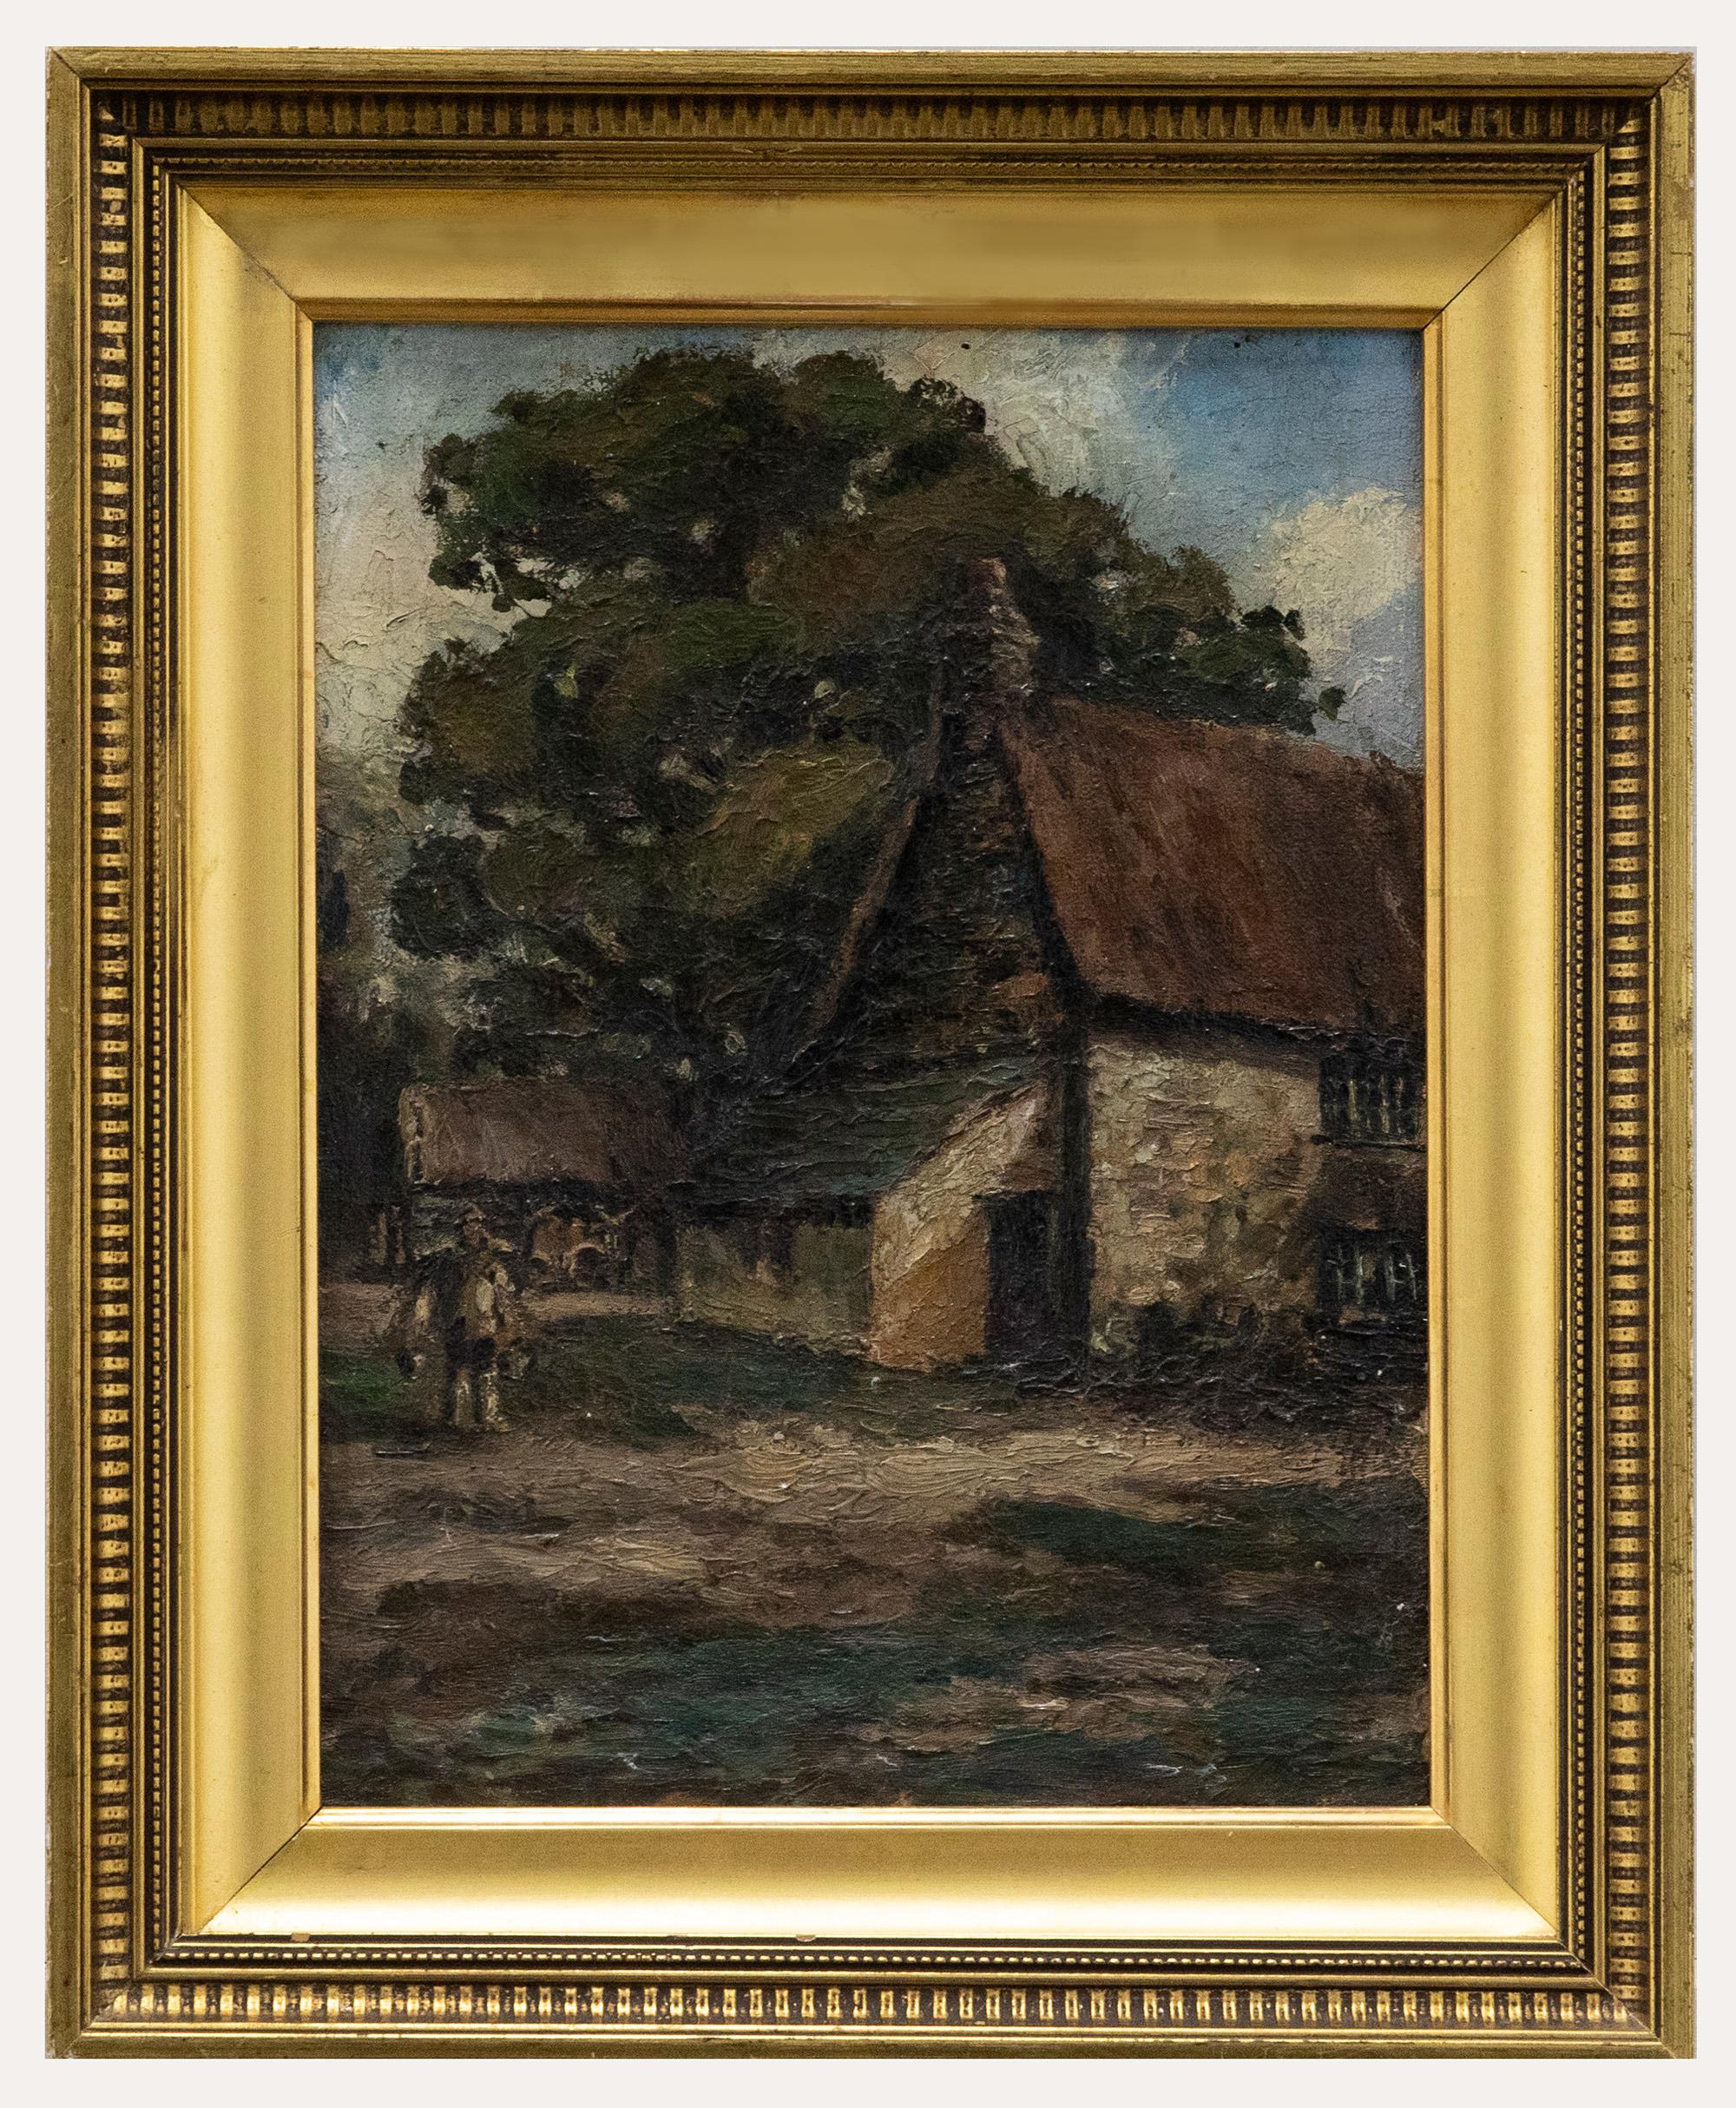 Unknown Landscape Painting - Framed Mid 20th Century Oil - Fetching the Water